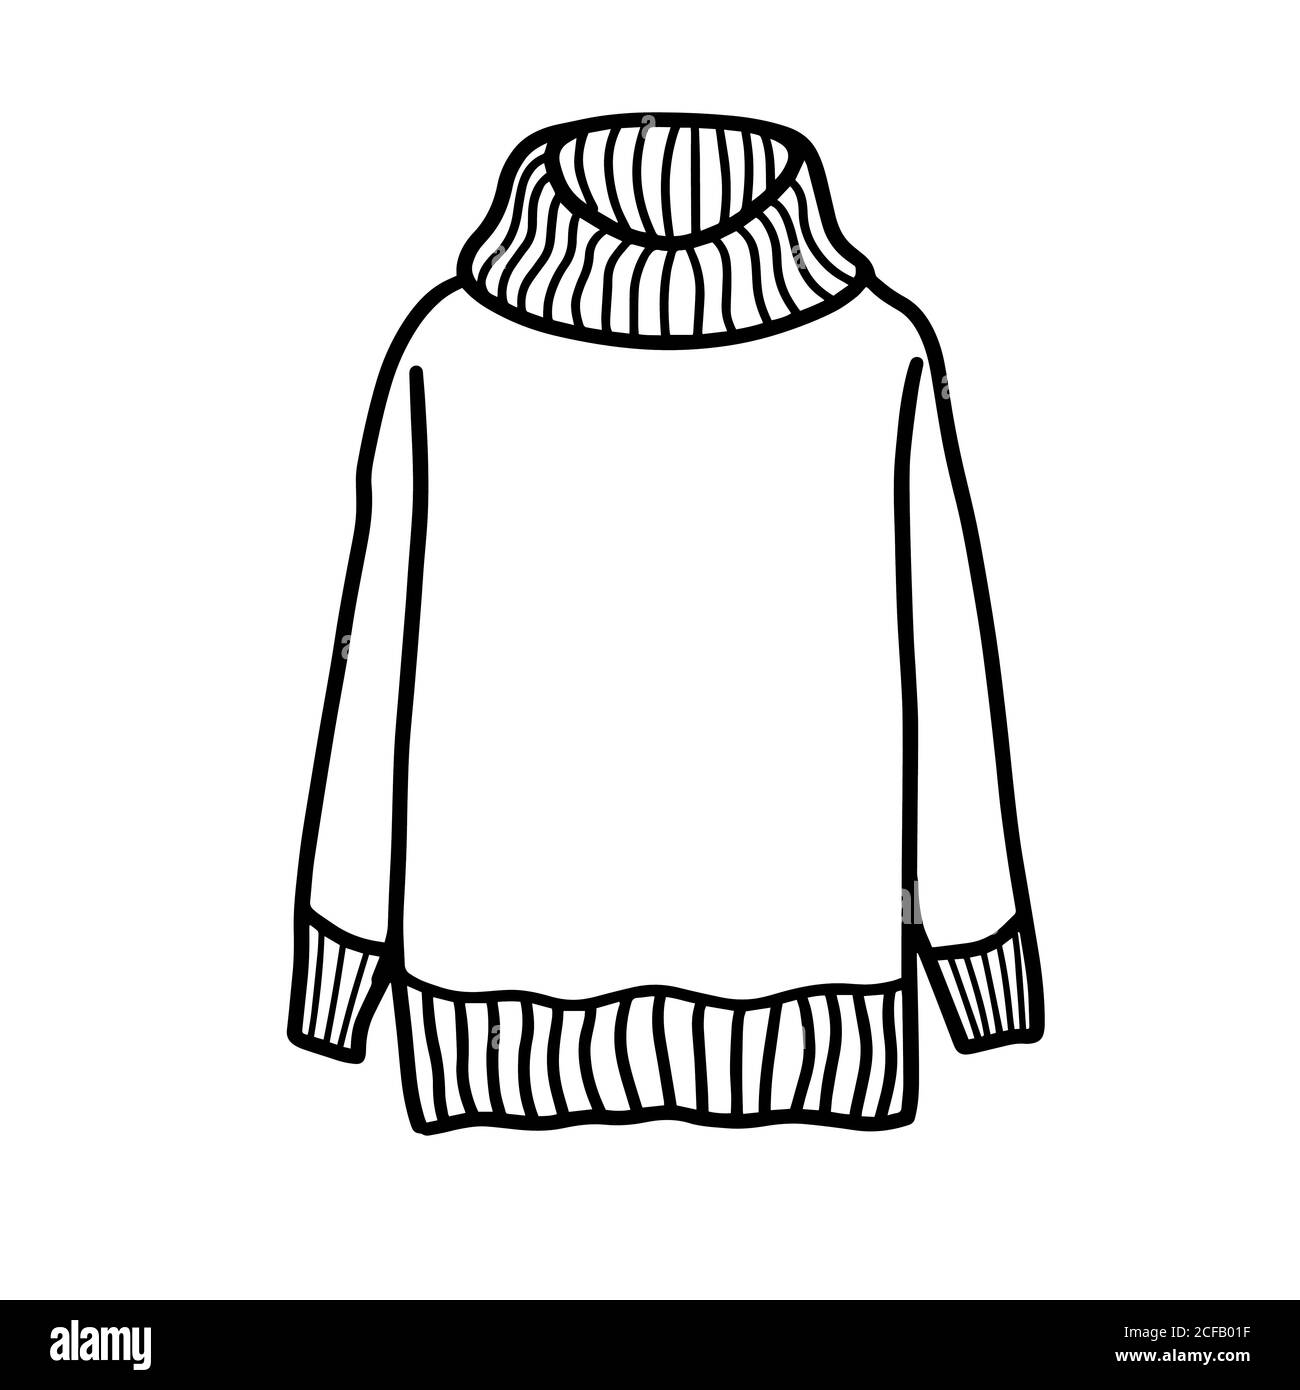 Scandinavian knitted jumper Black and White Stock Photos & Images - Alamy